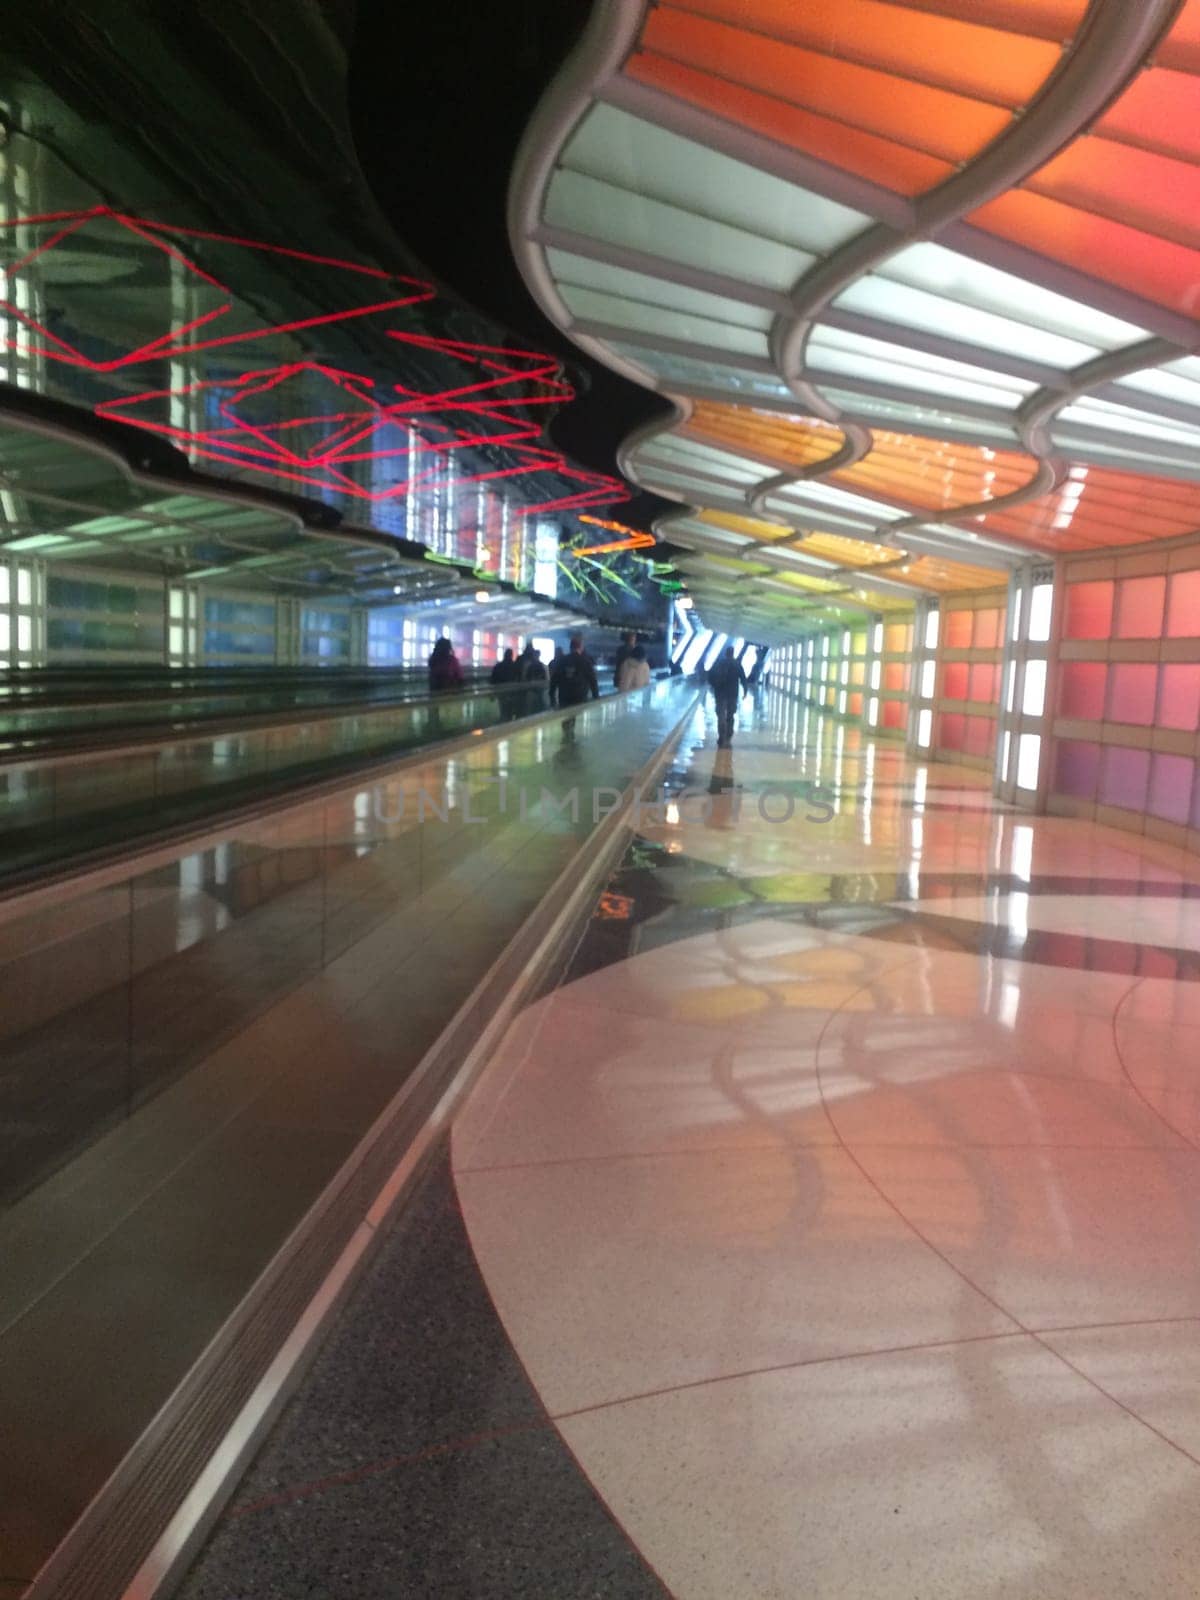 Chicago O'Hare International Airport Modern Colorful Lighting . High quality photo